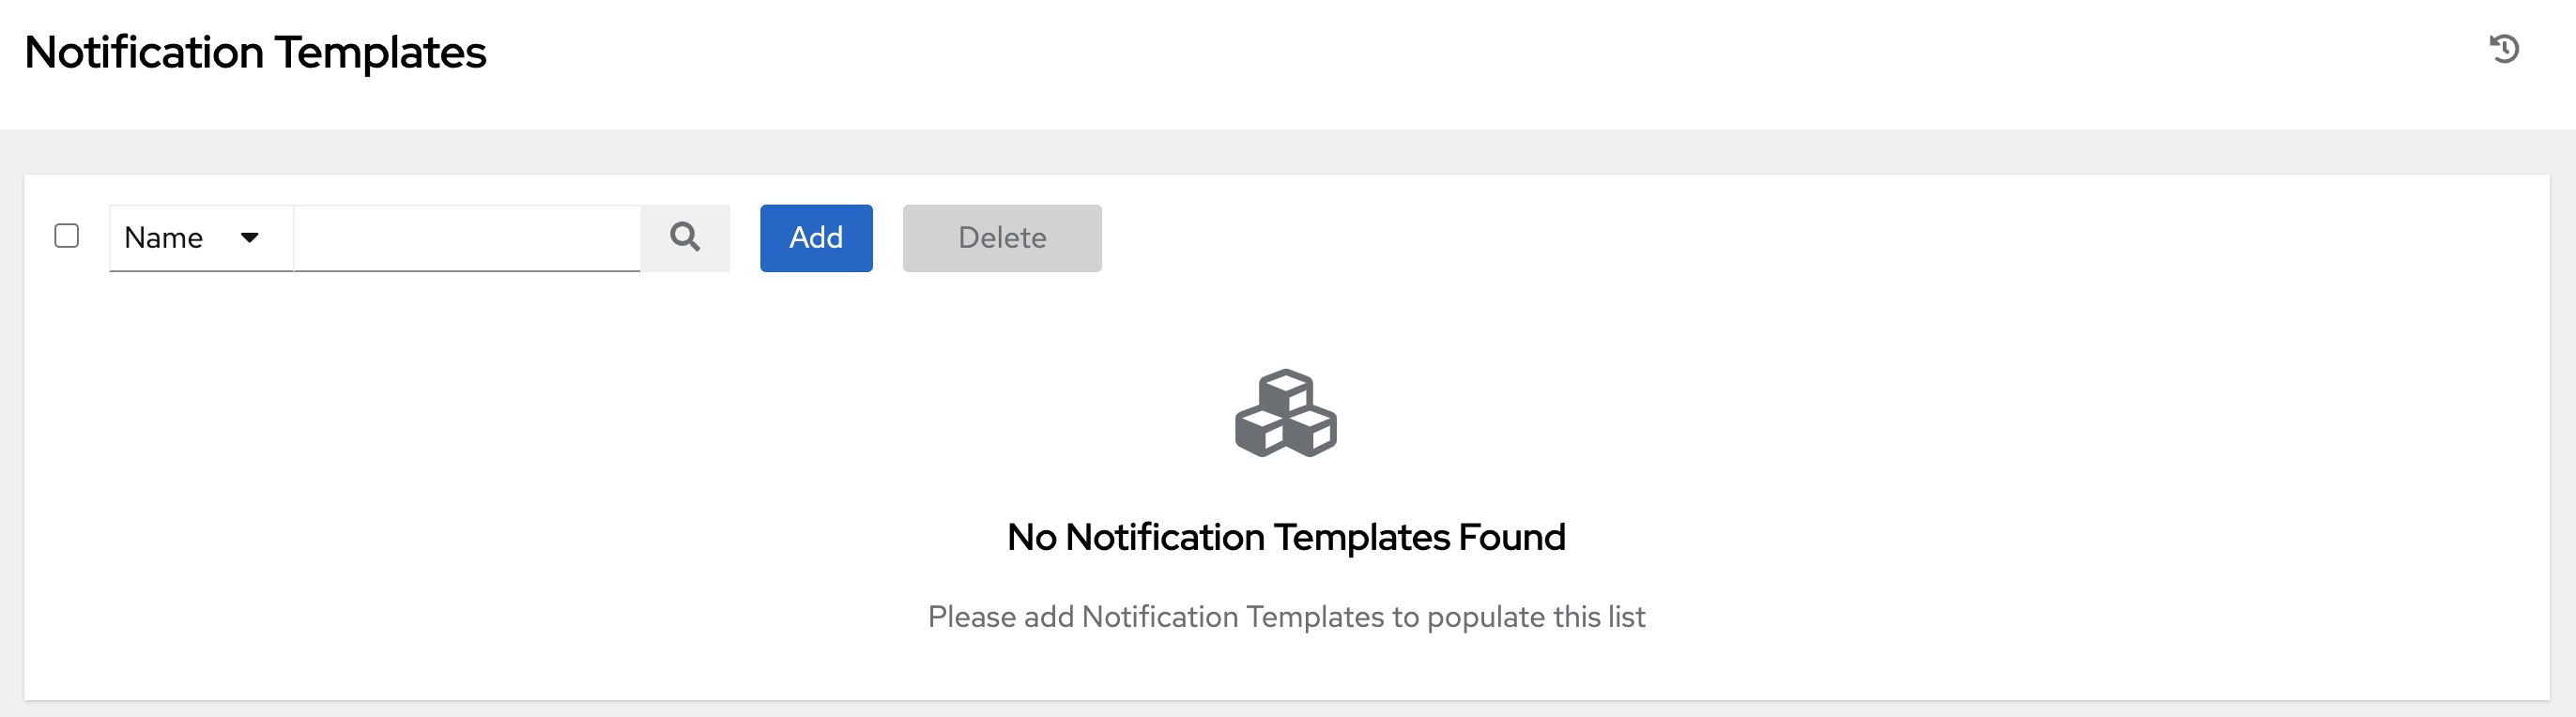 Notifications Templates page with no notification templates found.